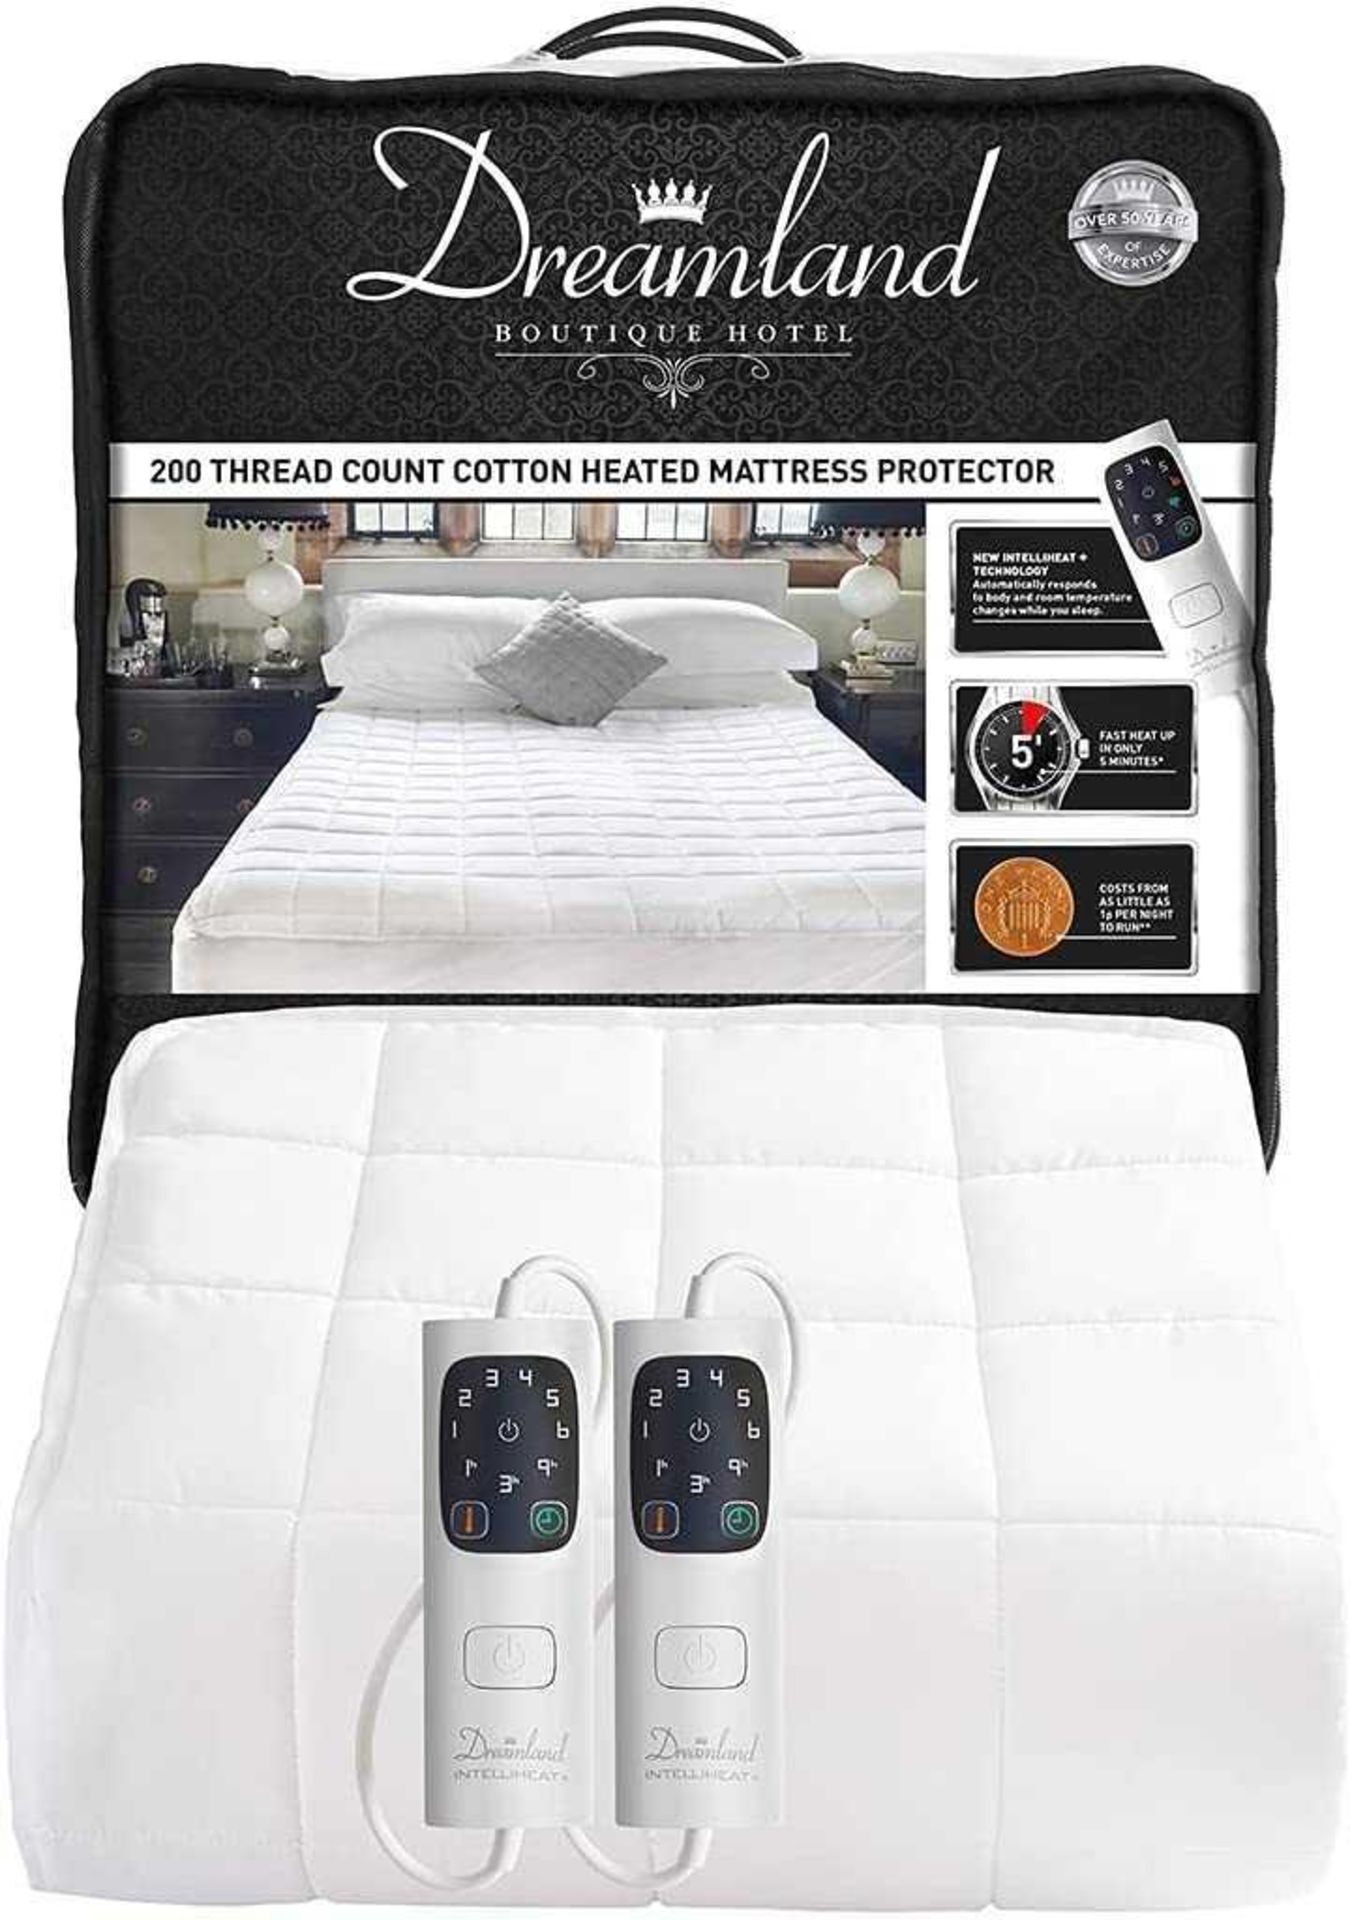 RRP £90 Bagged Dreamland 200 Thread Count Cotton Heated Mattress Protector